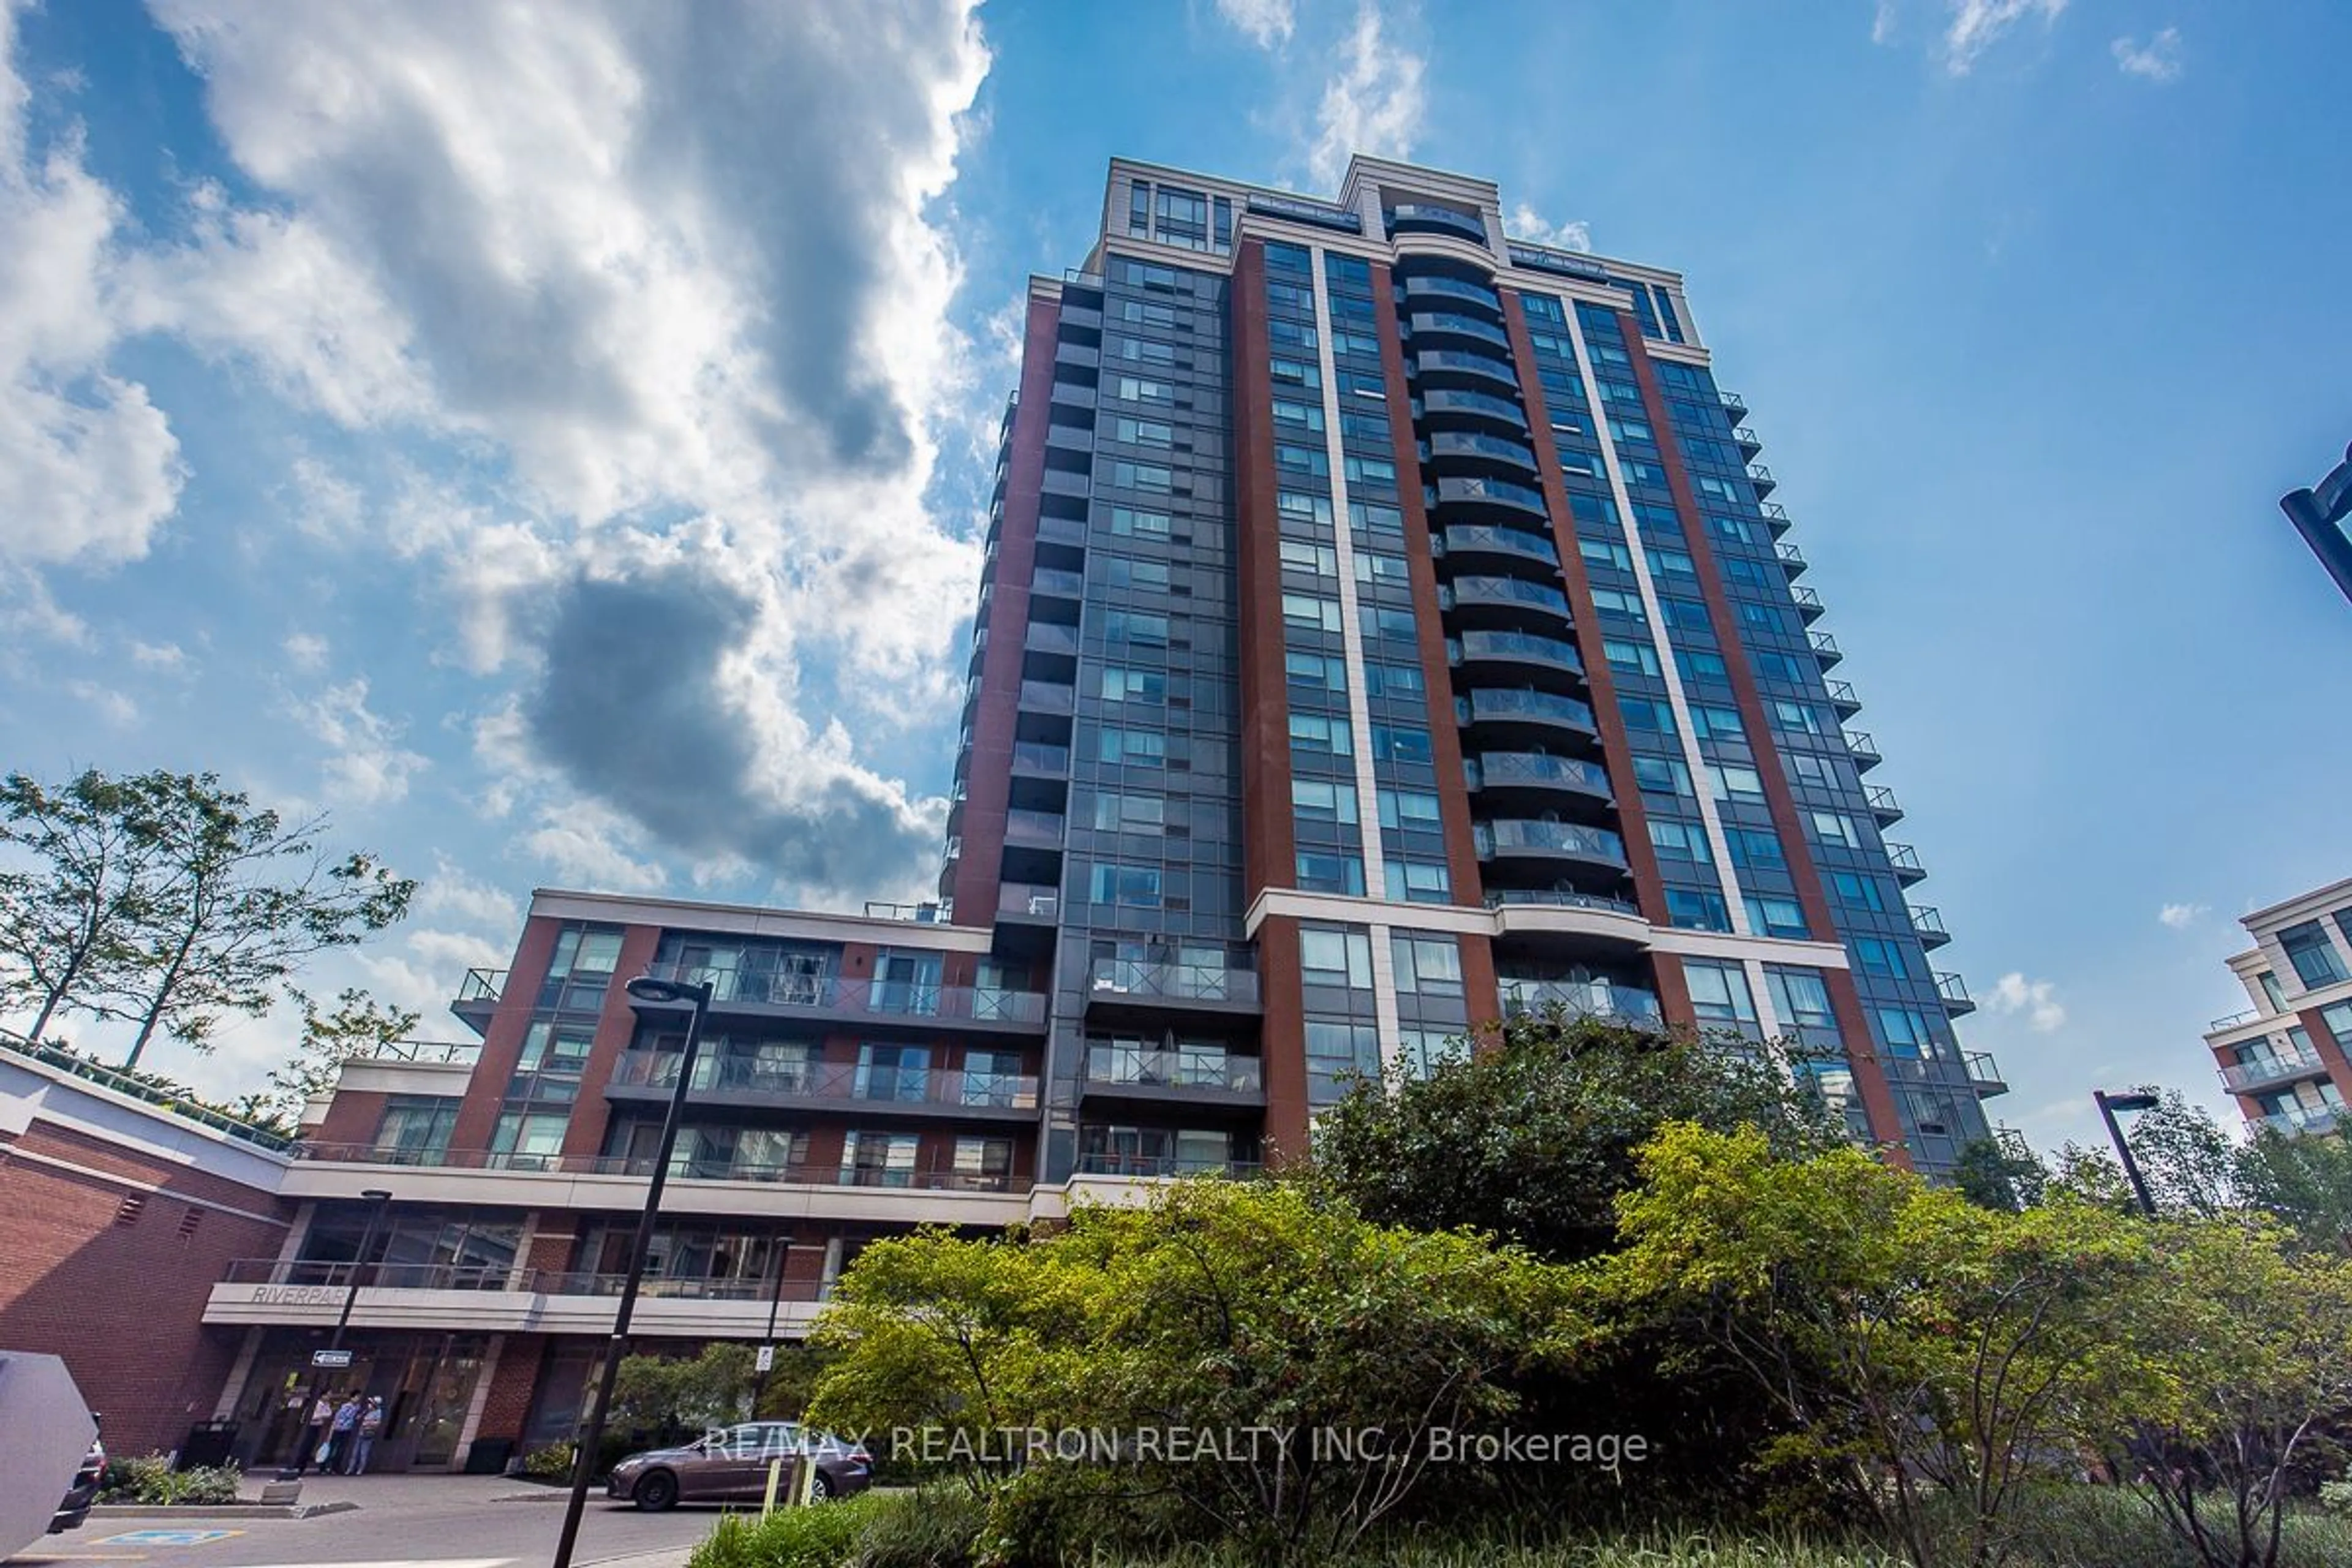 A pic from exterior of the house or condo for 8200 Birchmount Rd #716, Markham Ontario L3R 9W1